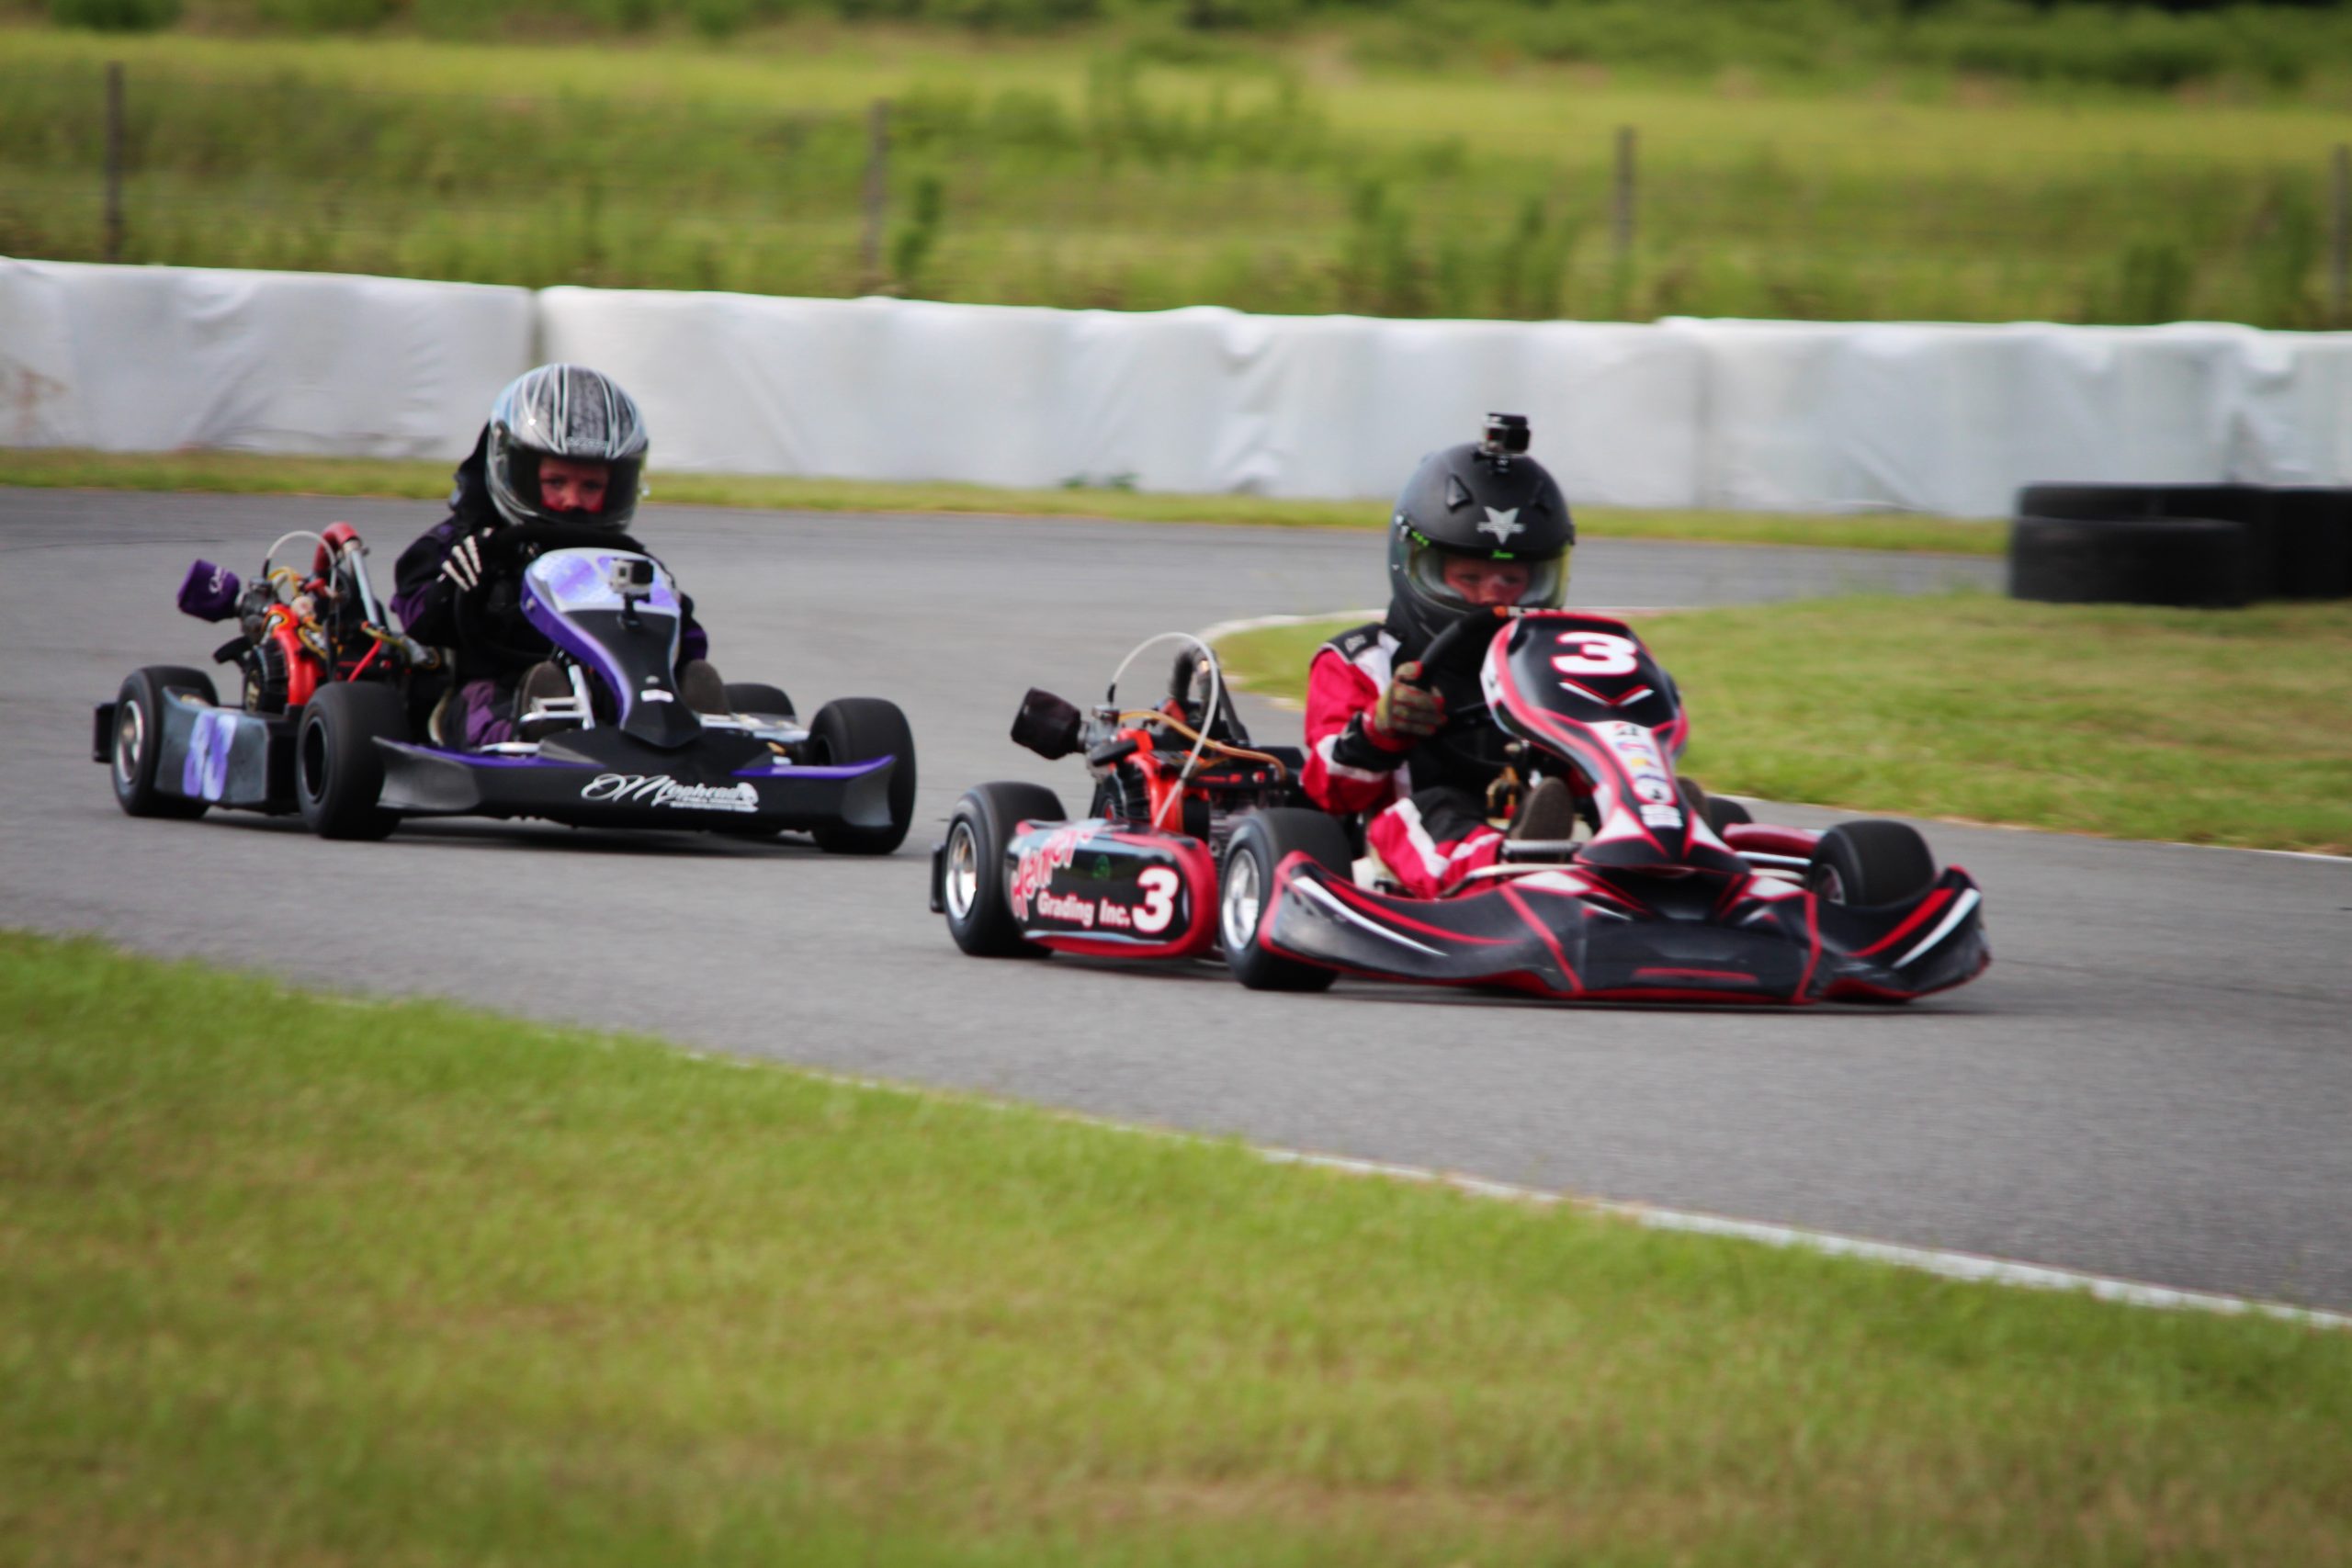 Jace Henley and Darryl Moglia racing their K2 Ignite Karts with custom graphics at BMP's Local Race Series